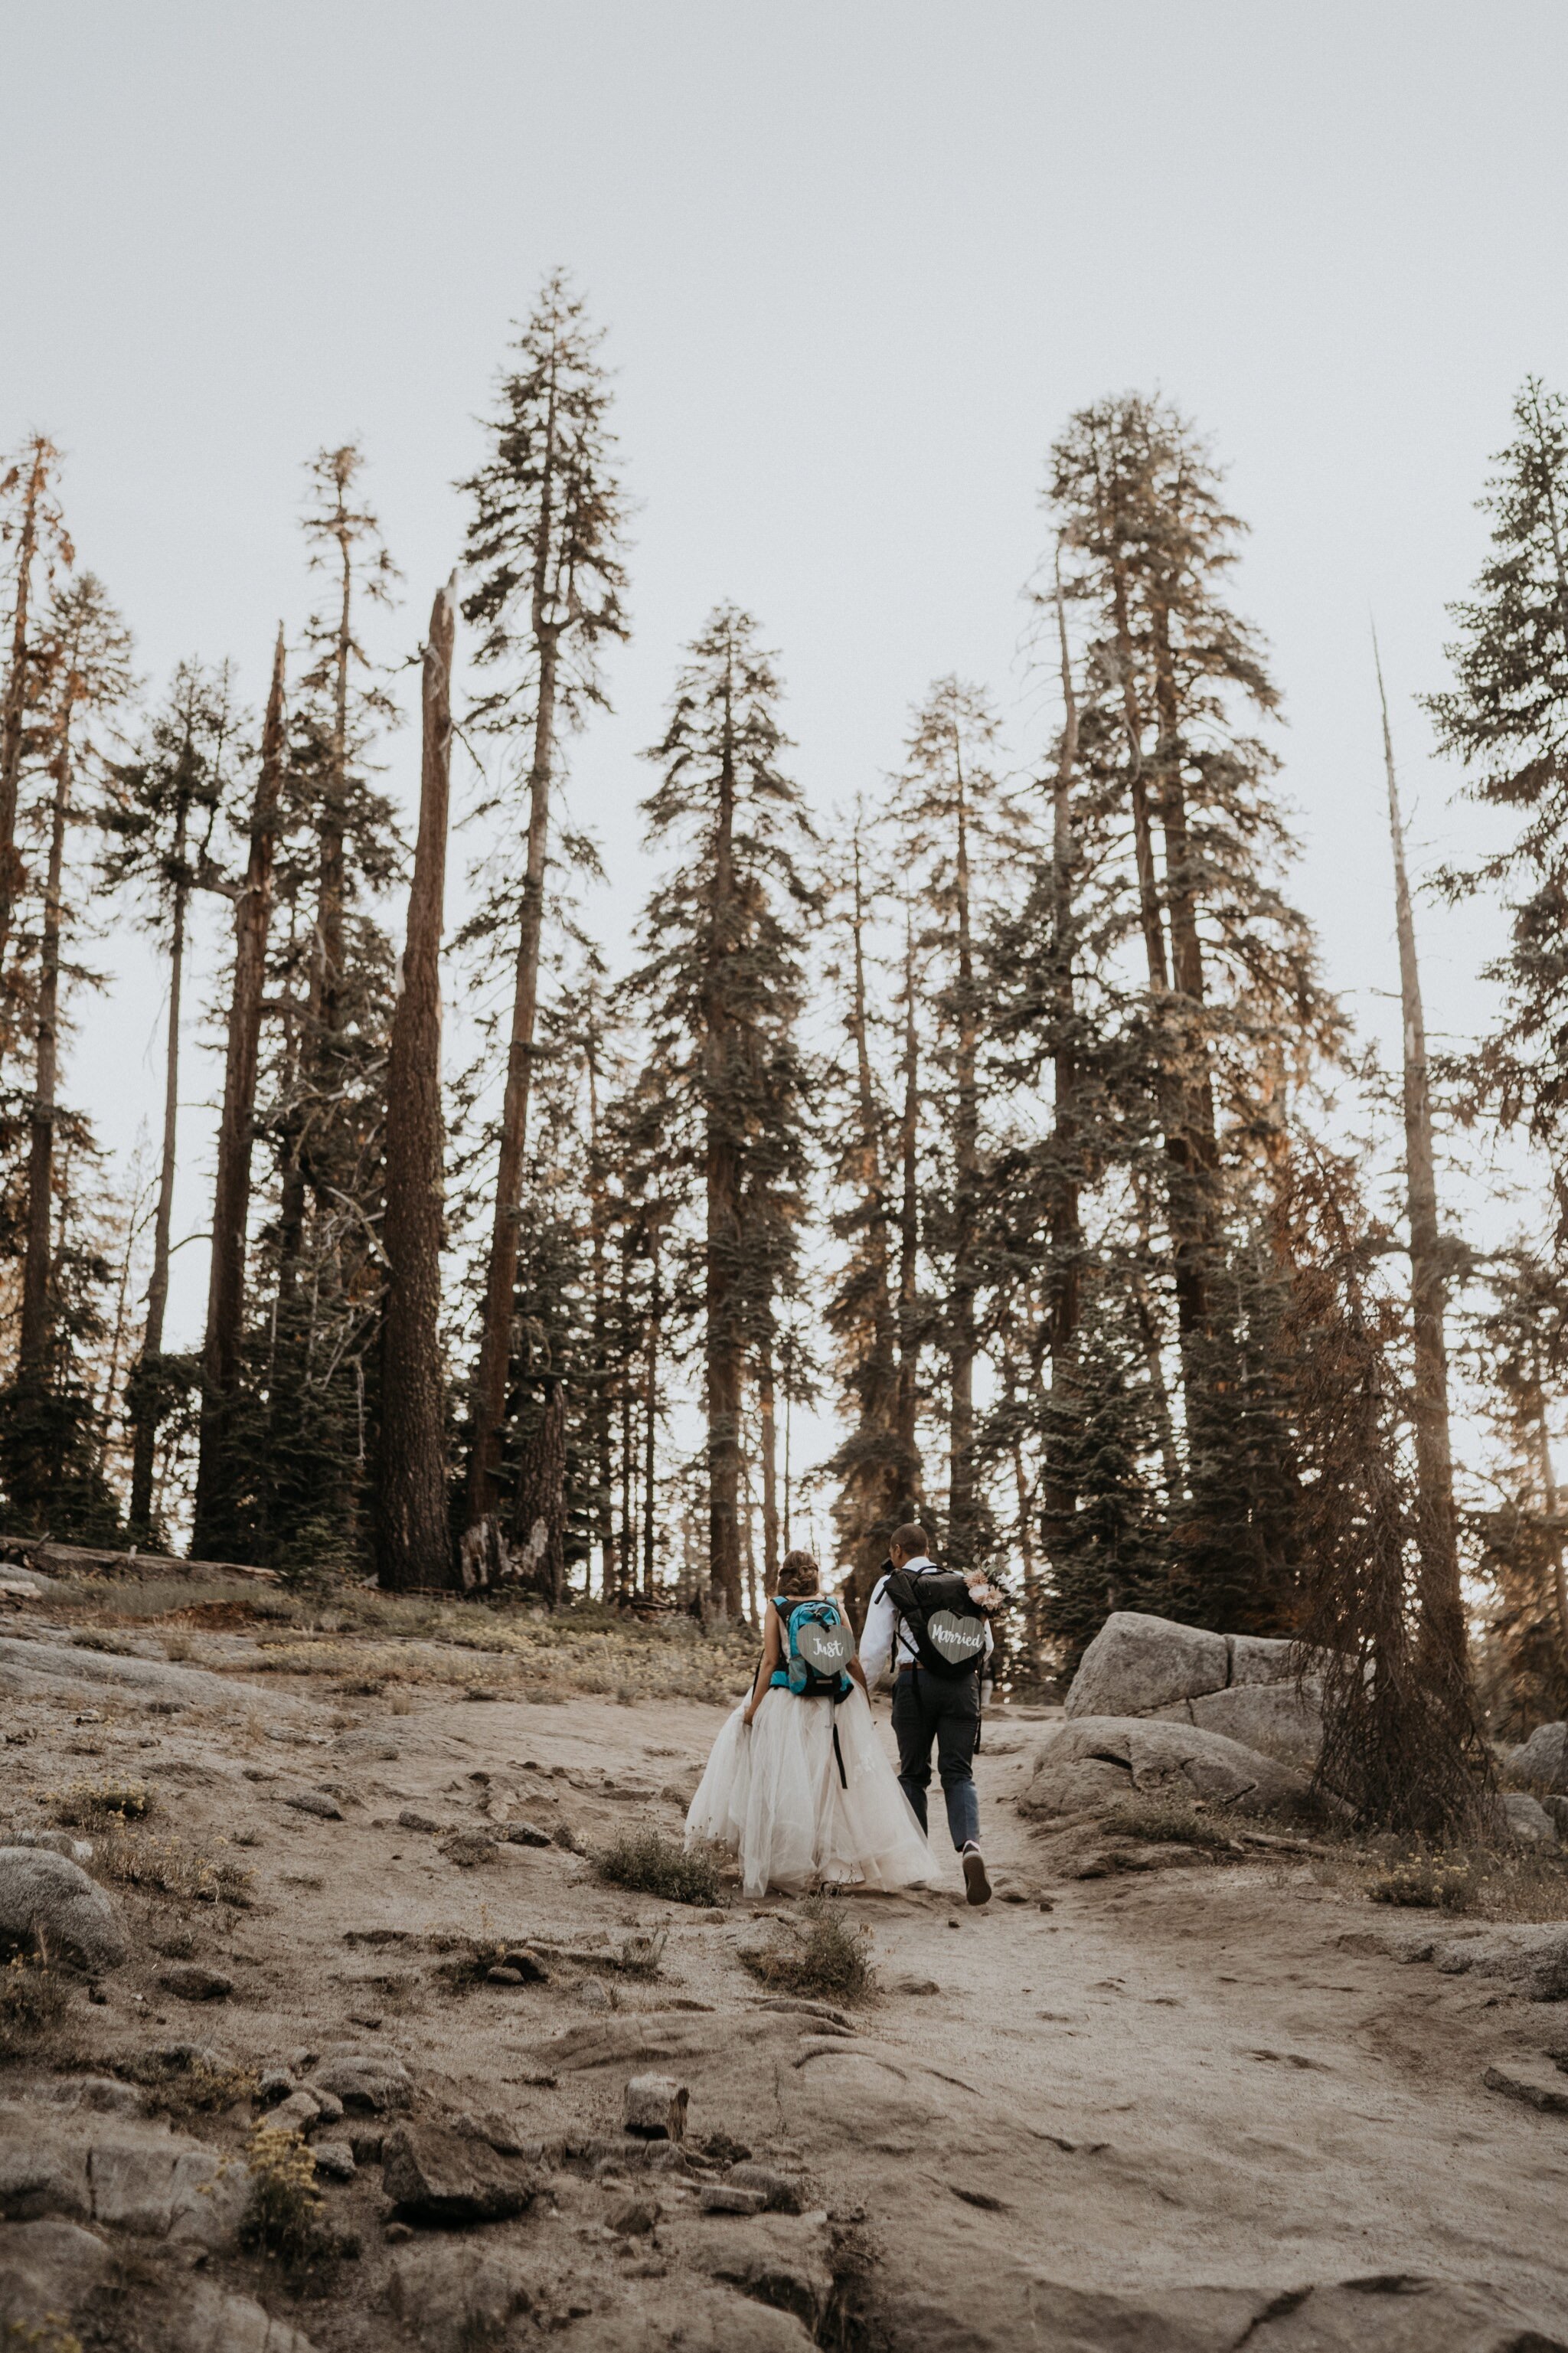 Married couple hiking with "Just Married" sign to Taft Point for sunset photos on their Elopement Day at Yosemite National Park